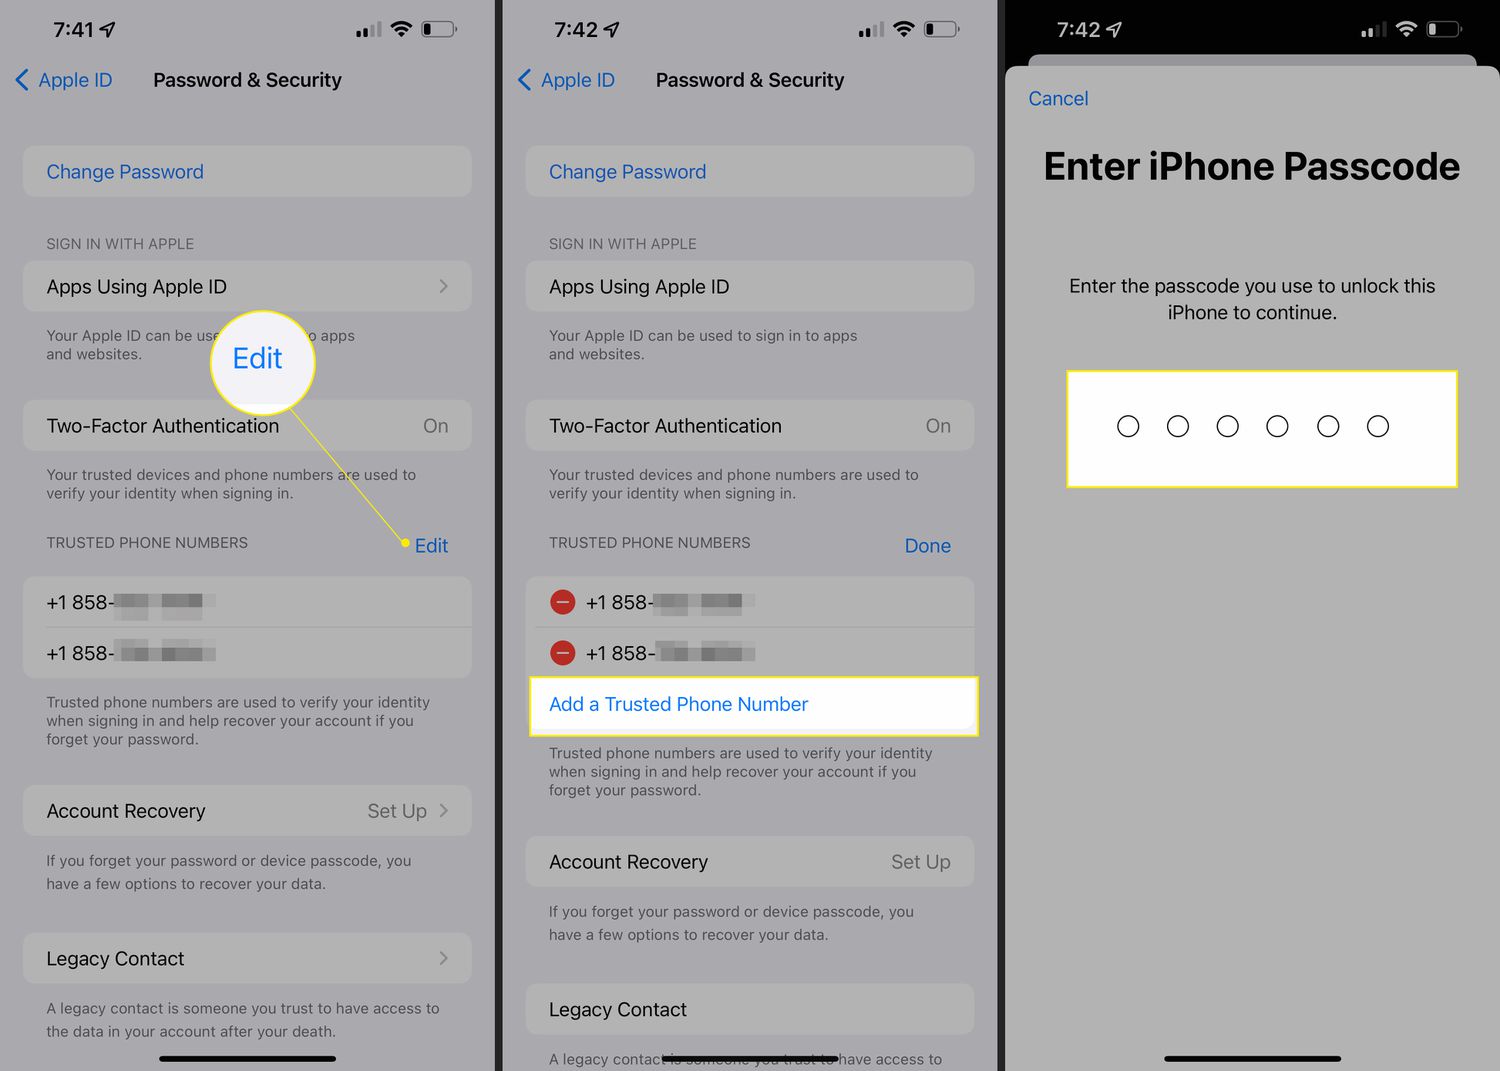 iOS Password & Security settings with Edit, Add a Trusted Phone Number, and Passcode entry highlighted